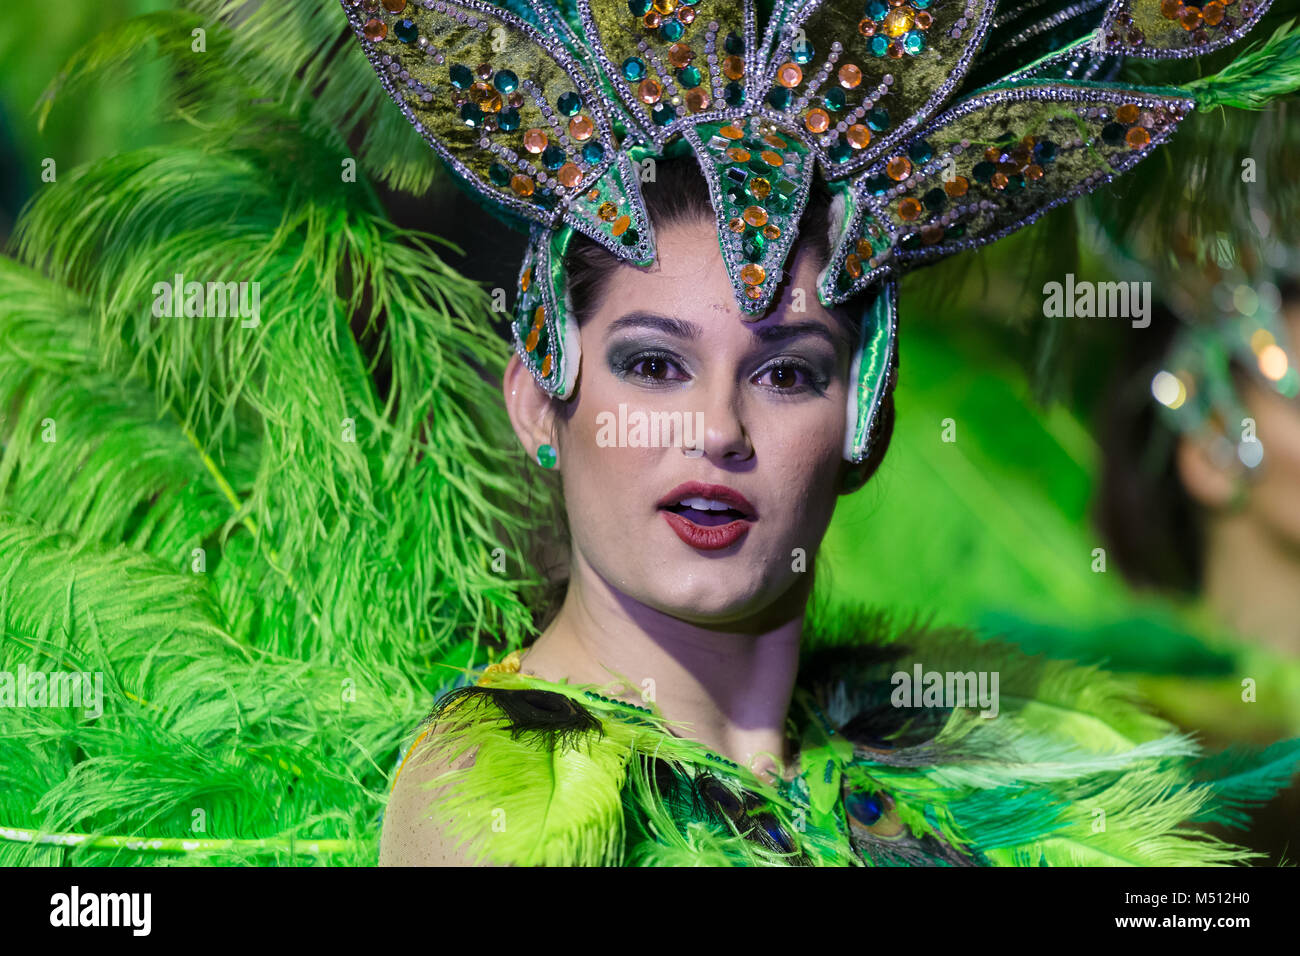 FUNCHAL, PORTUGAL - FEBRUARY 9, 2018: Participants of the Madeira Island Carnival dancing in the parade in Funchal city, Madeira, Portugal. Stock Photo